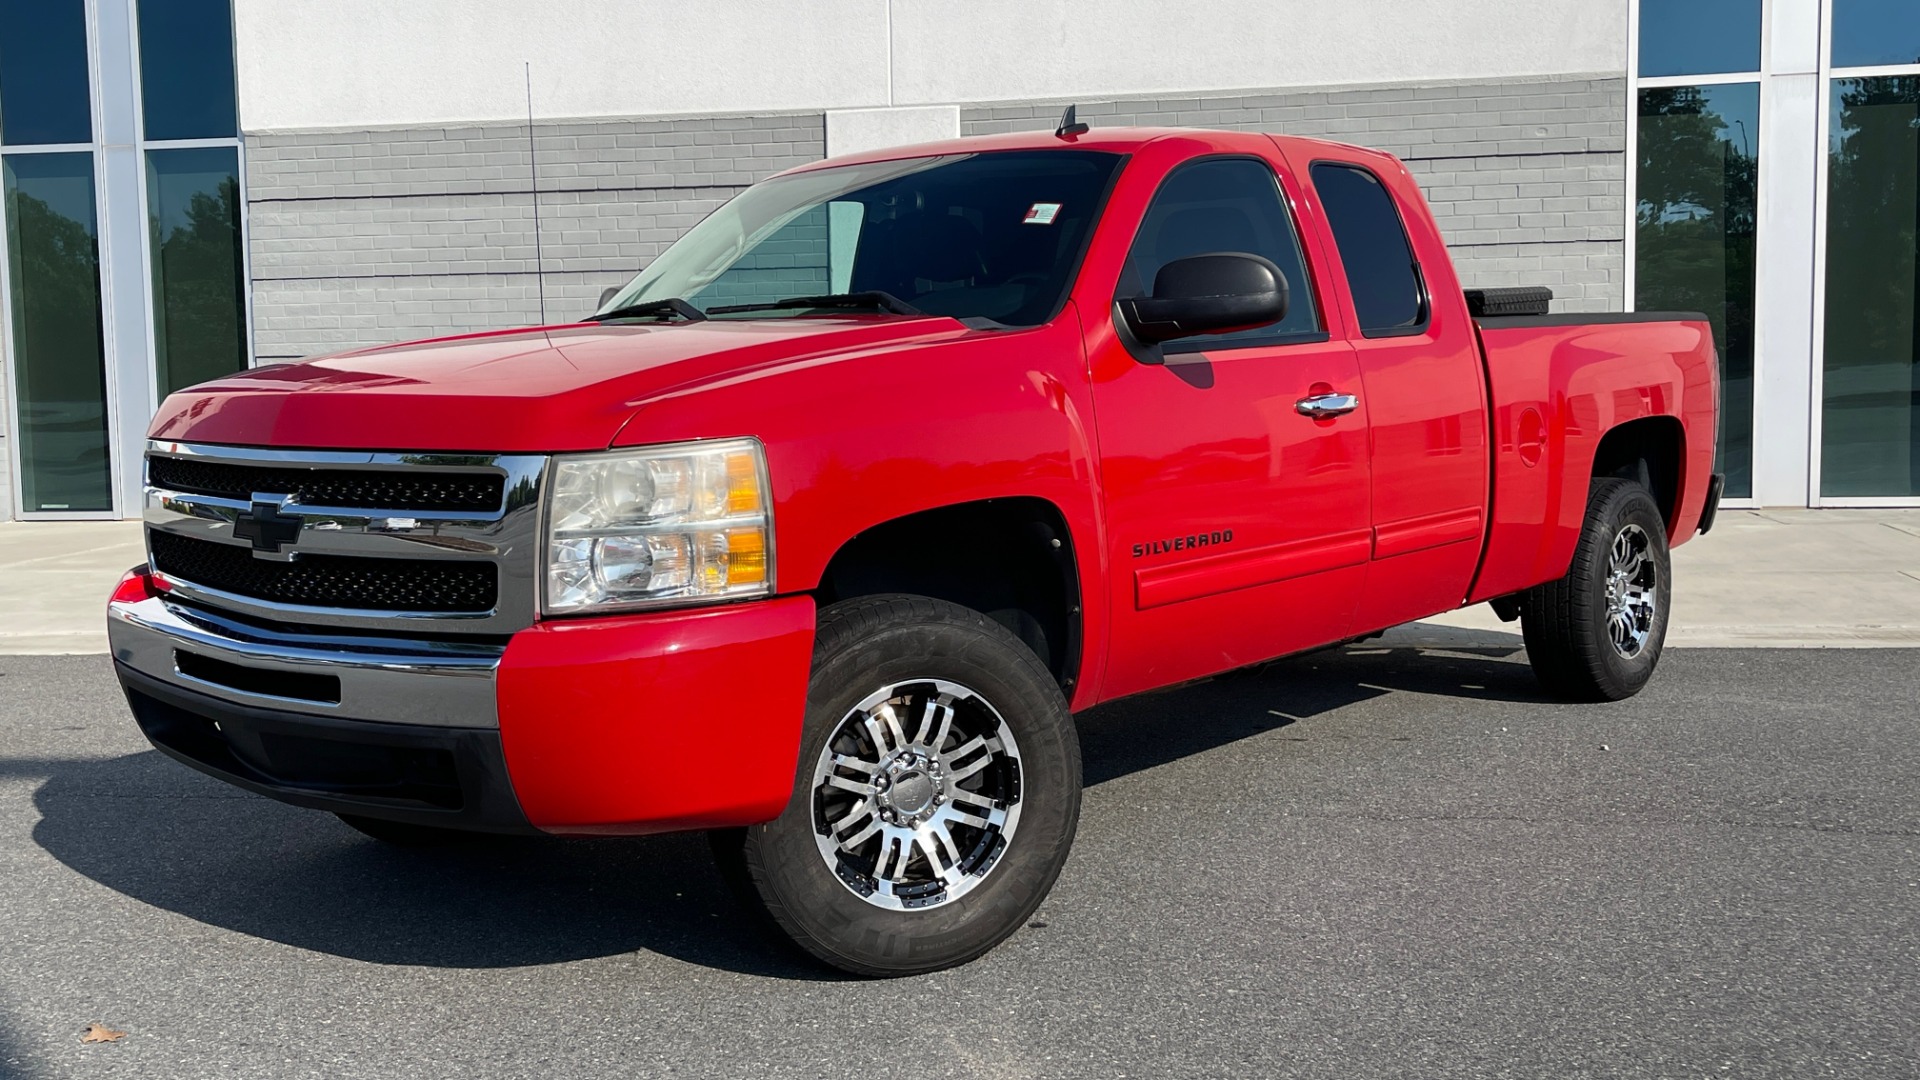 Used 2010 Chevrolet SILVERADO 1500 LT EXT CAB / 2WD / 5.3L V8 / AUTO / POWER PACK PLUS / TOWING for sale Sold at Formula Imports in Charlotte NC 28227 1